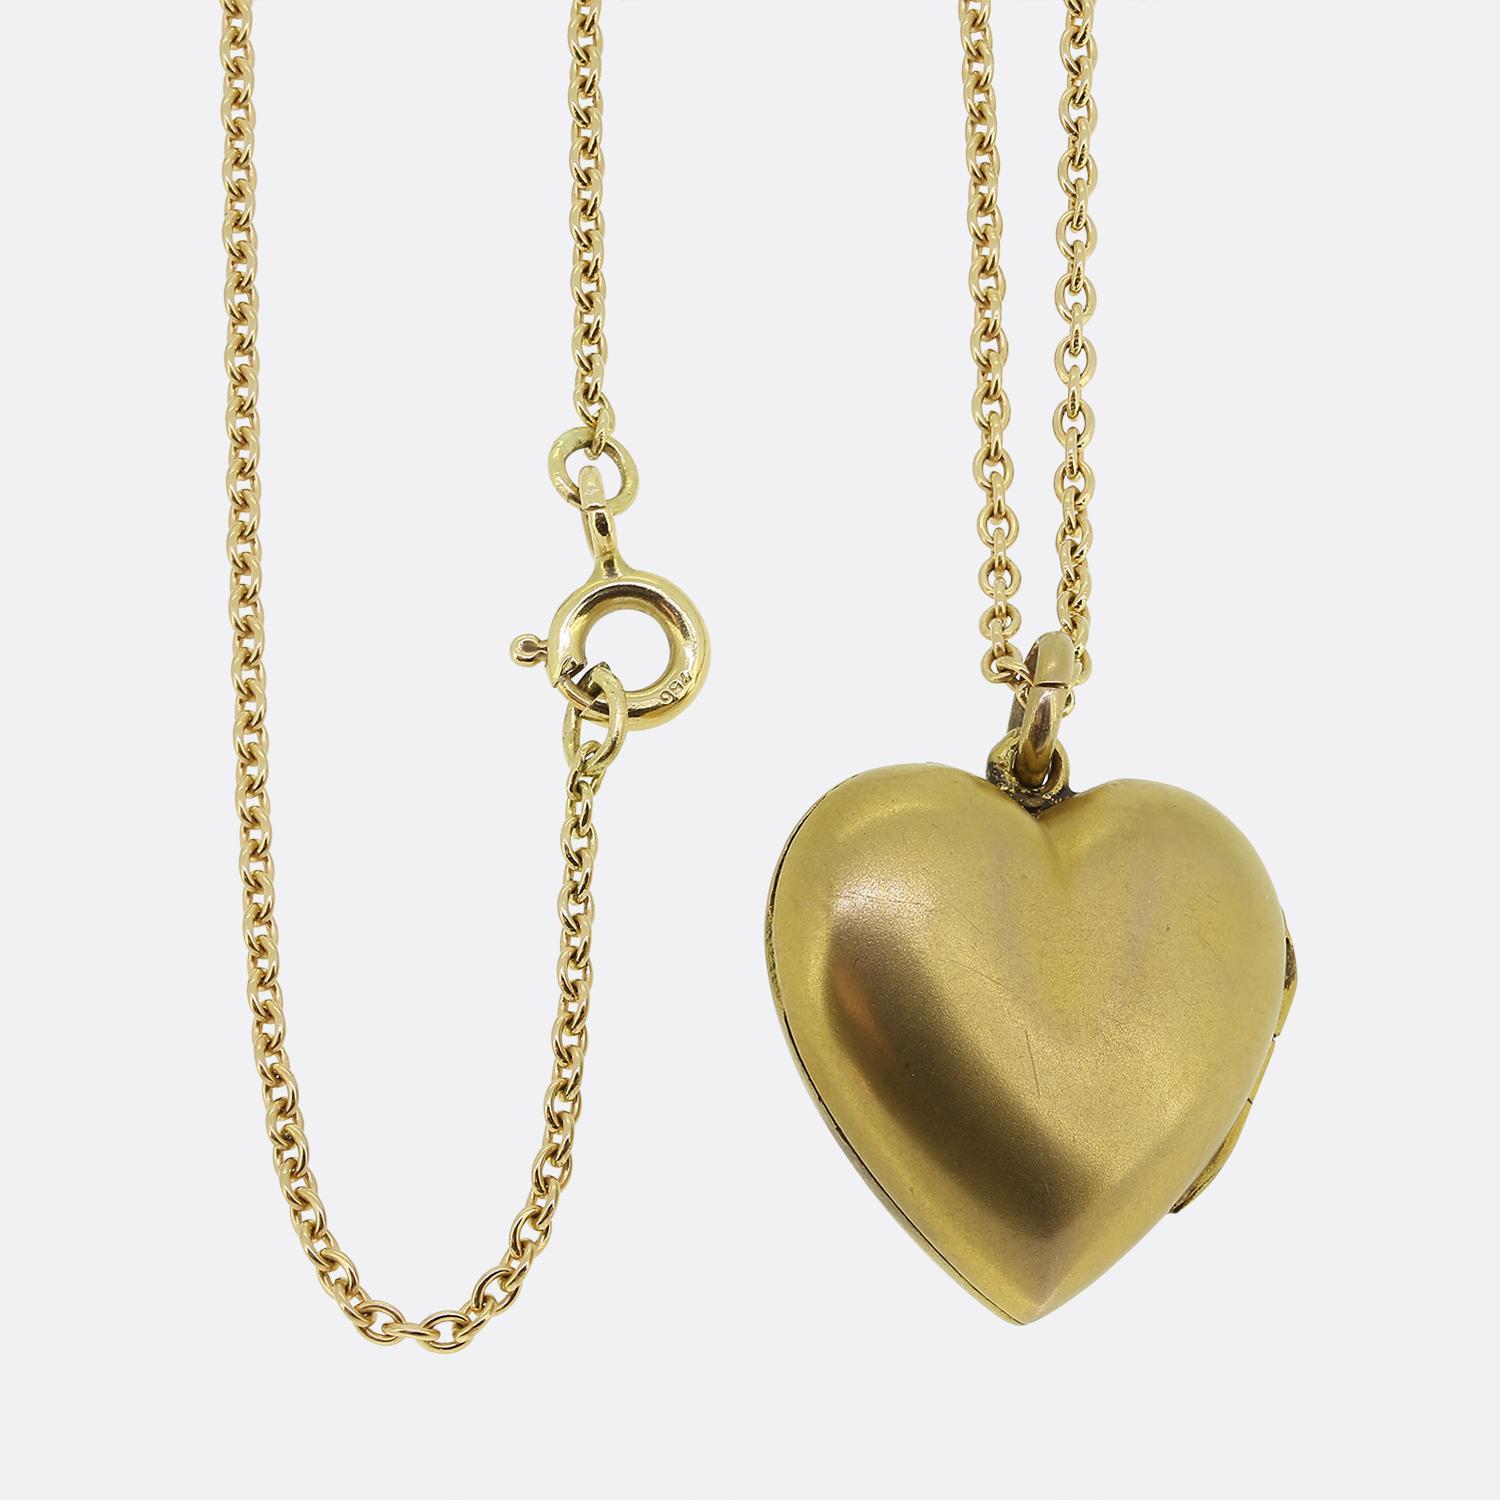 Here we have a charming diamond locket necklace. This antique locket has been crafted from 15ct yellow gold into the the shape of a love heart and showcases a fine matte finish. This pendant has then been expertly set with a single rose cut diamond